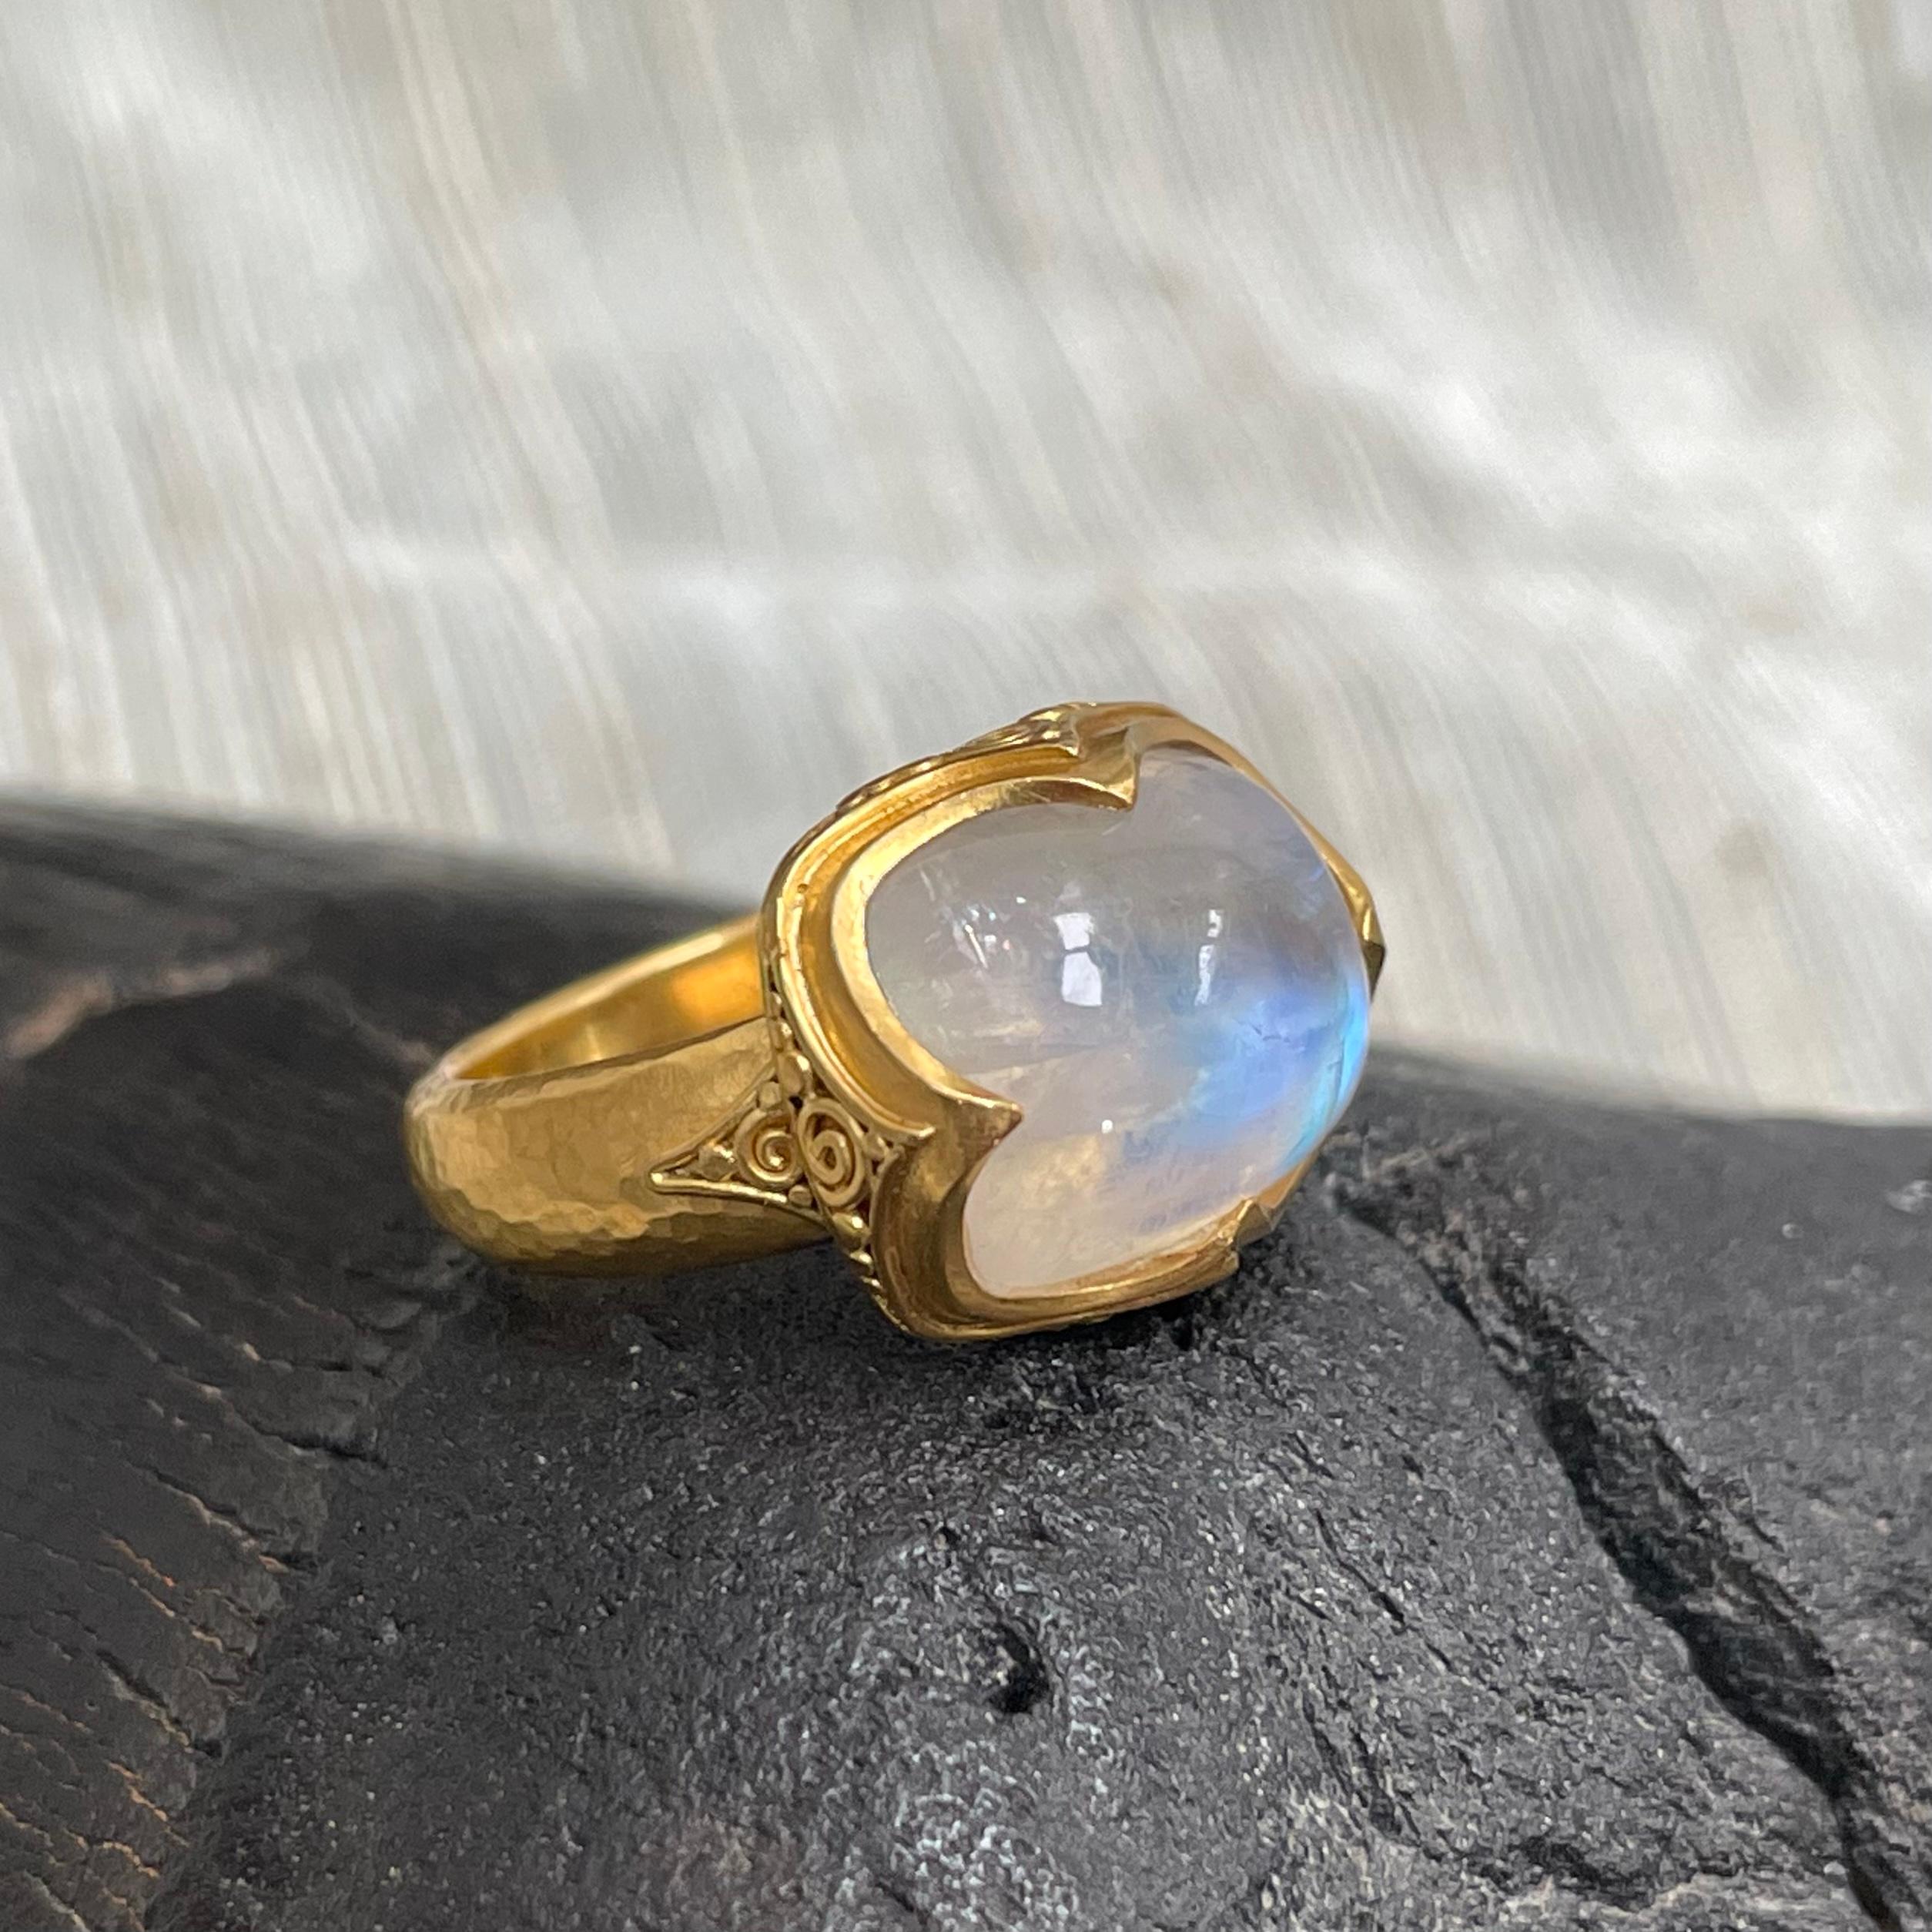 A magical and luminescent cushion shaped 10 x 14 mm rainbow moonstone cabochon is set sideways in a handmade high carat 